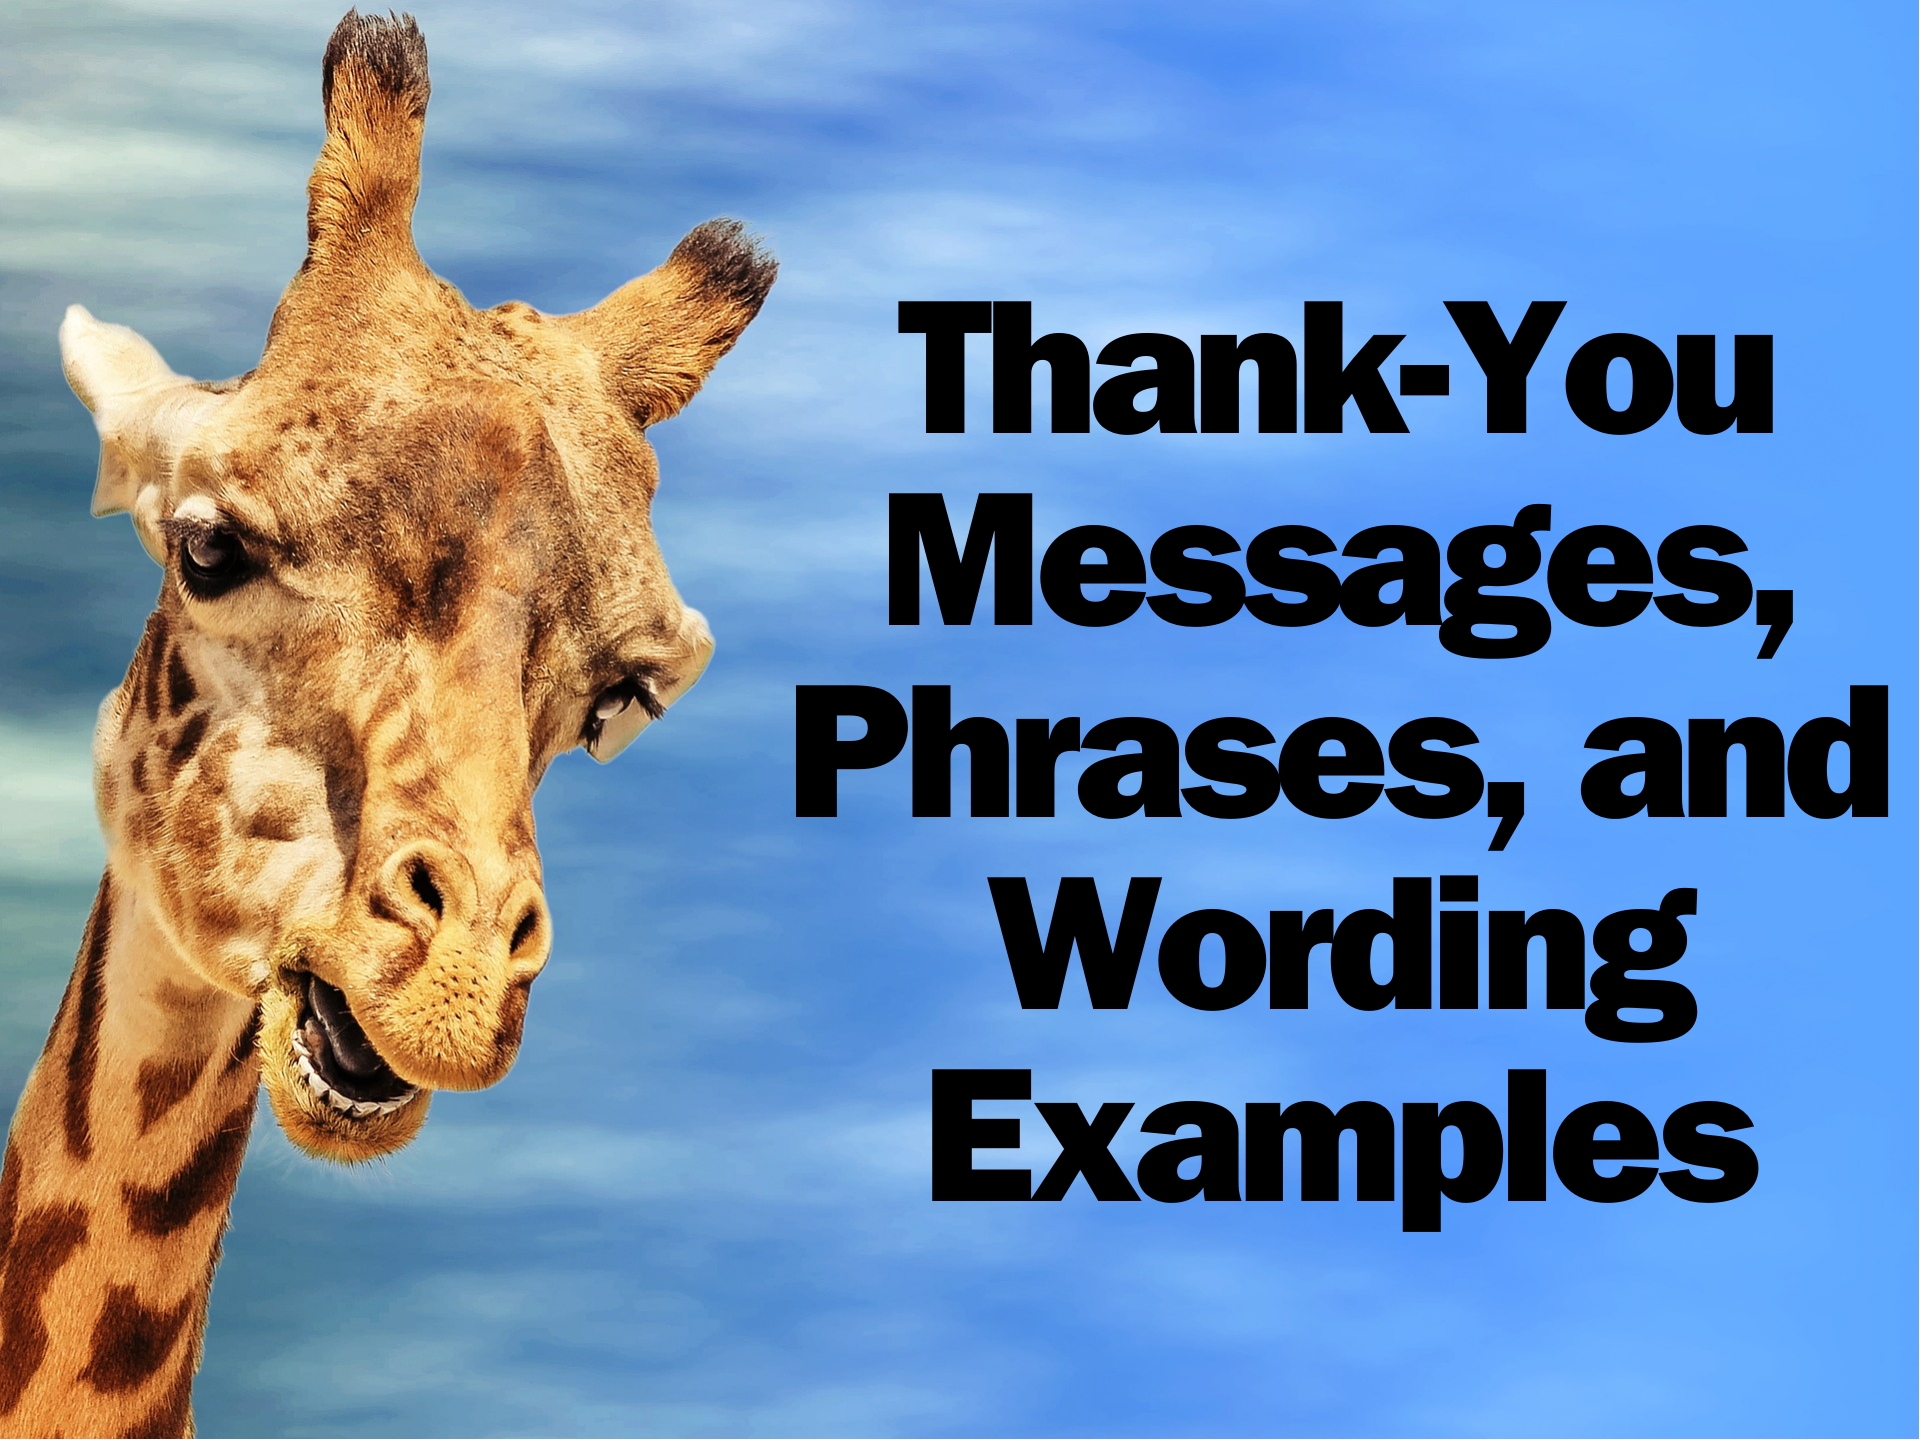 Comprehensive Guide to Thank-You Messages, Phrases, and Wording Examples